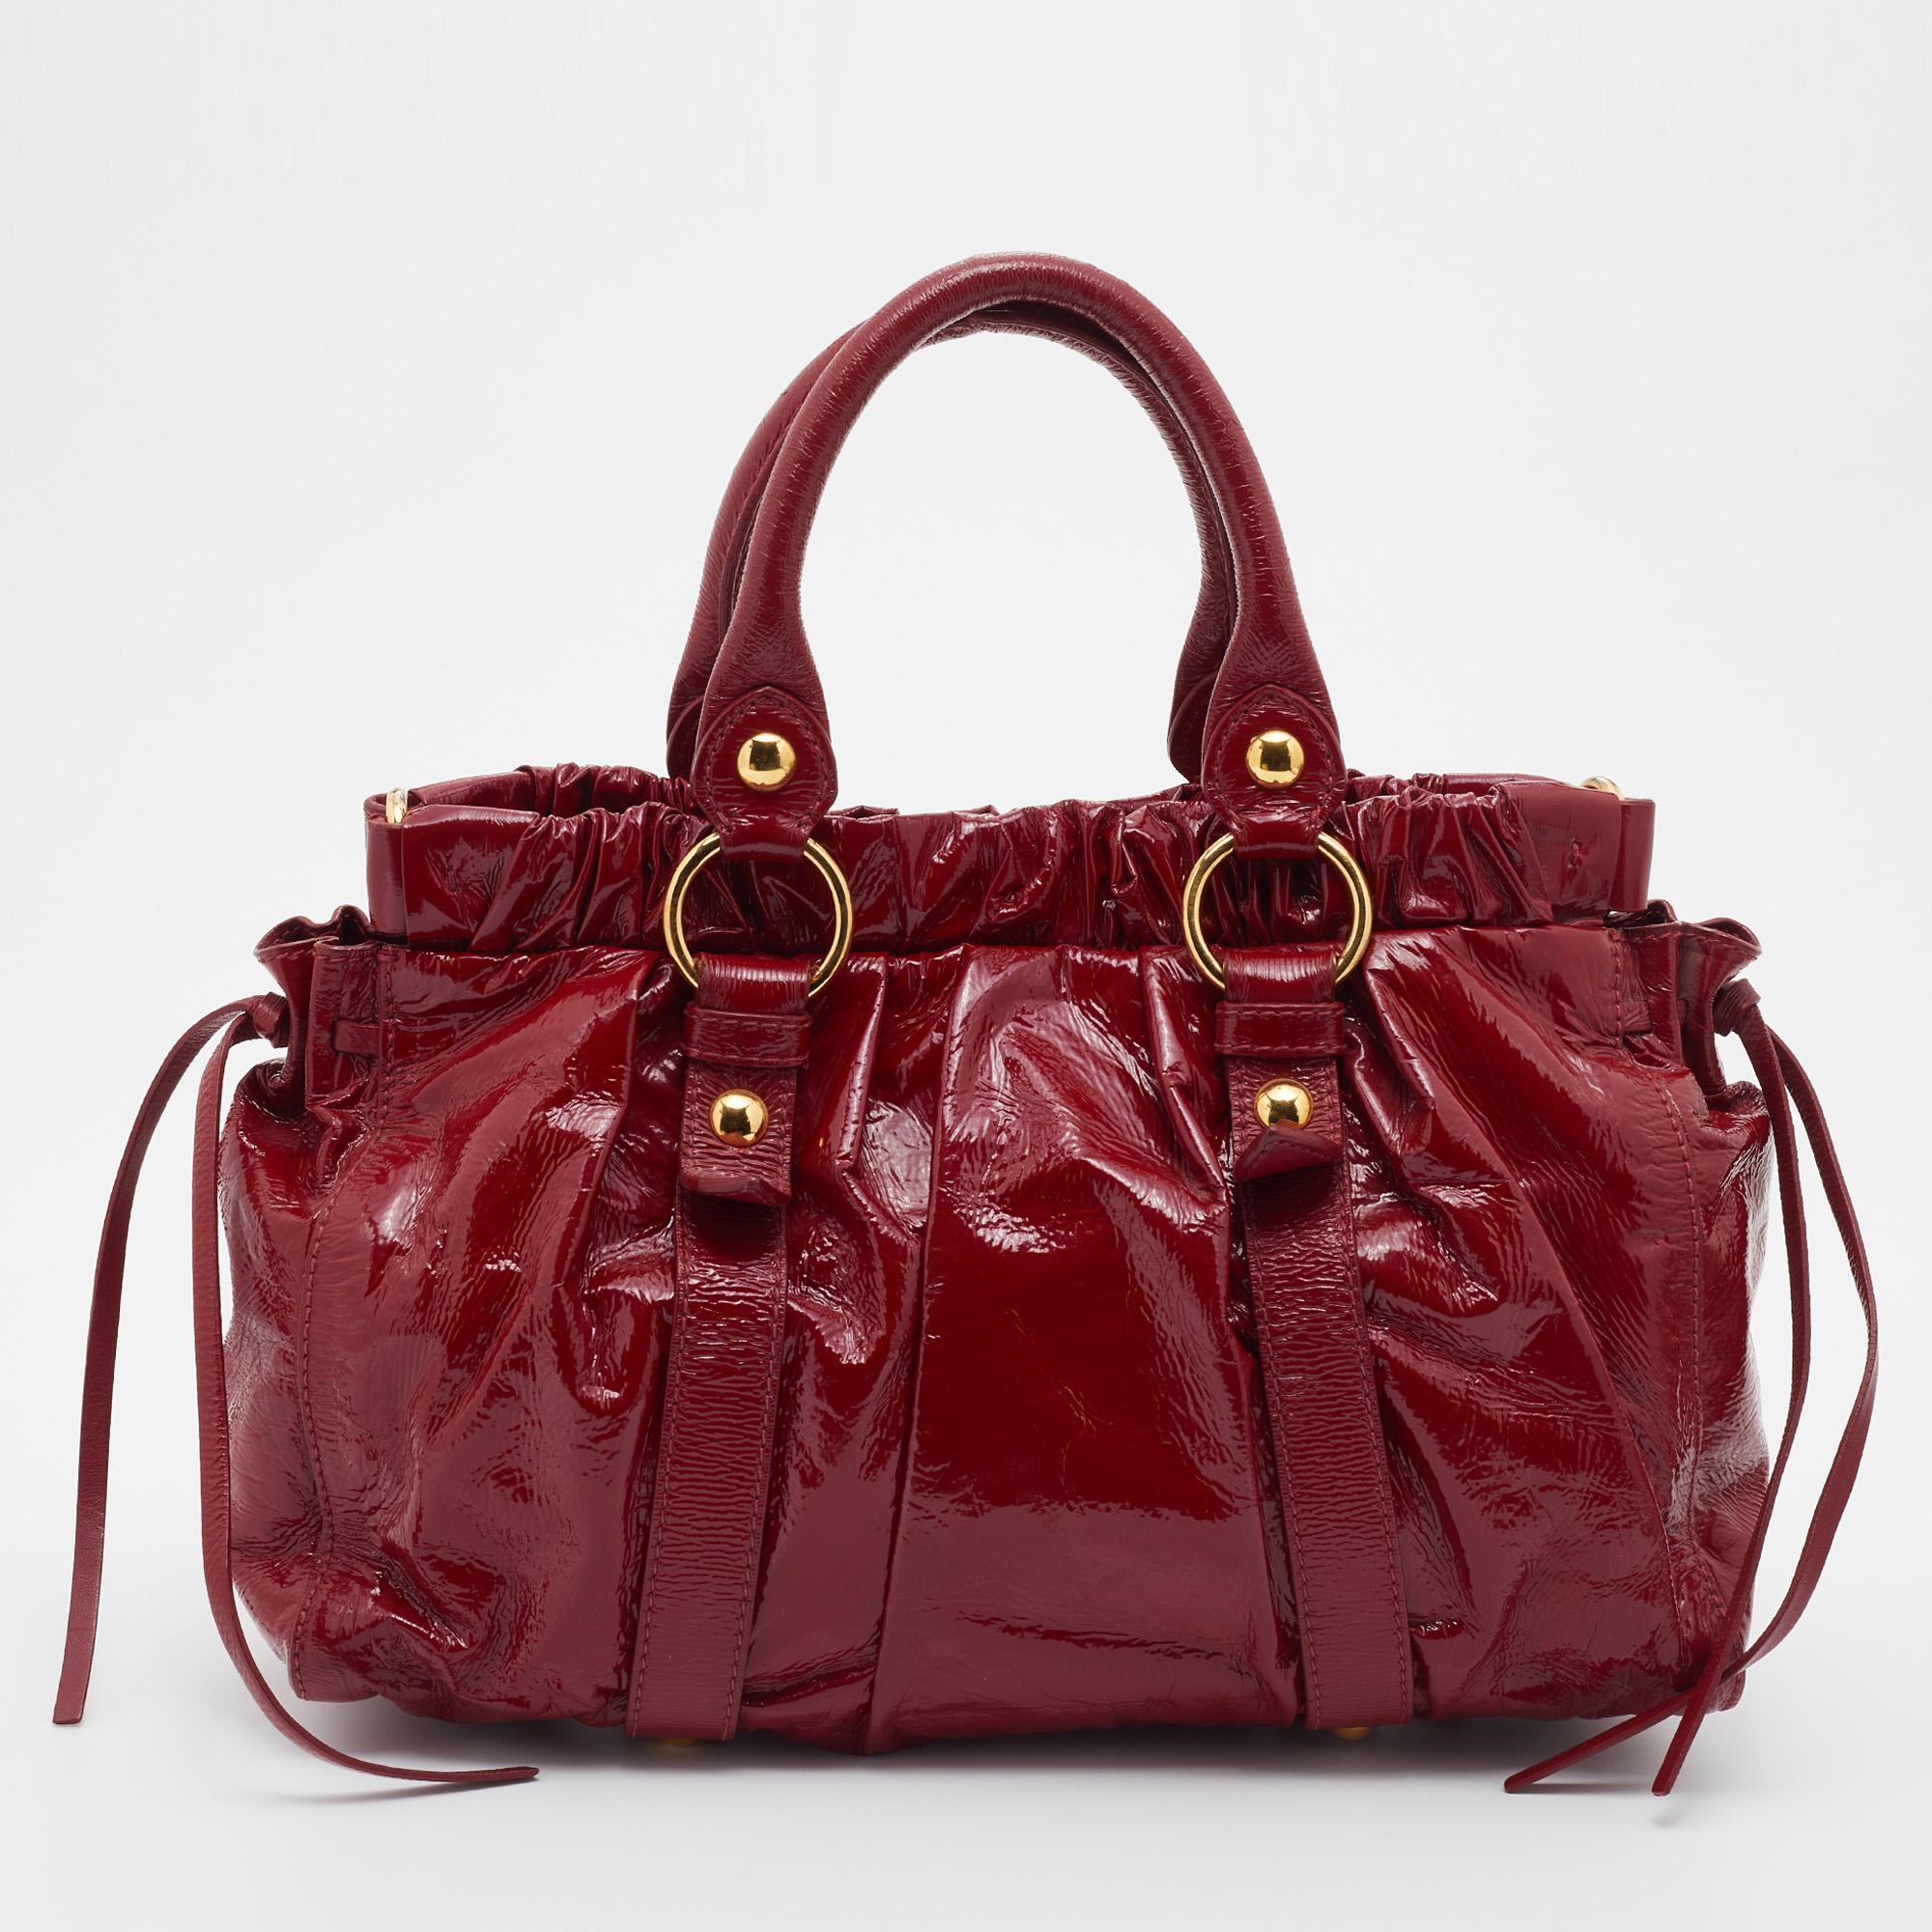 Displaying the brand's creativity and vision, this Miu Miu tote is crafted with patent in red color. It is designed in an interesting gathered style and has dual top handles and a detachable shoulder strap. The bag comes with a fabric-lined interior